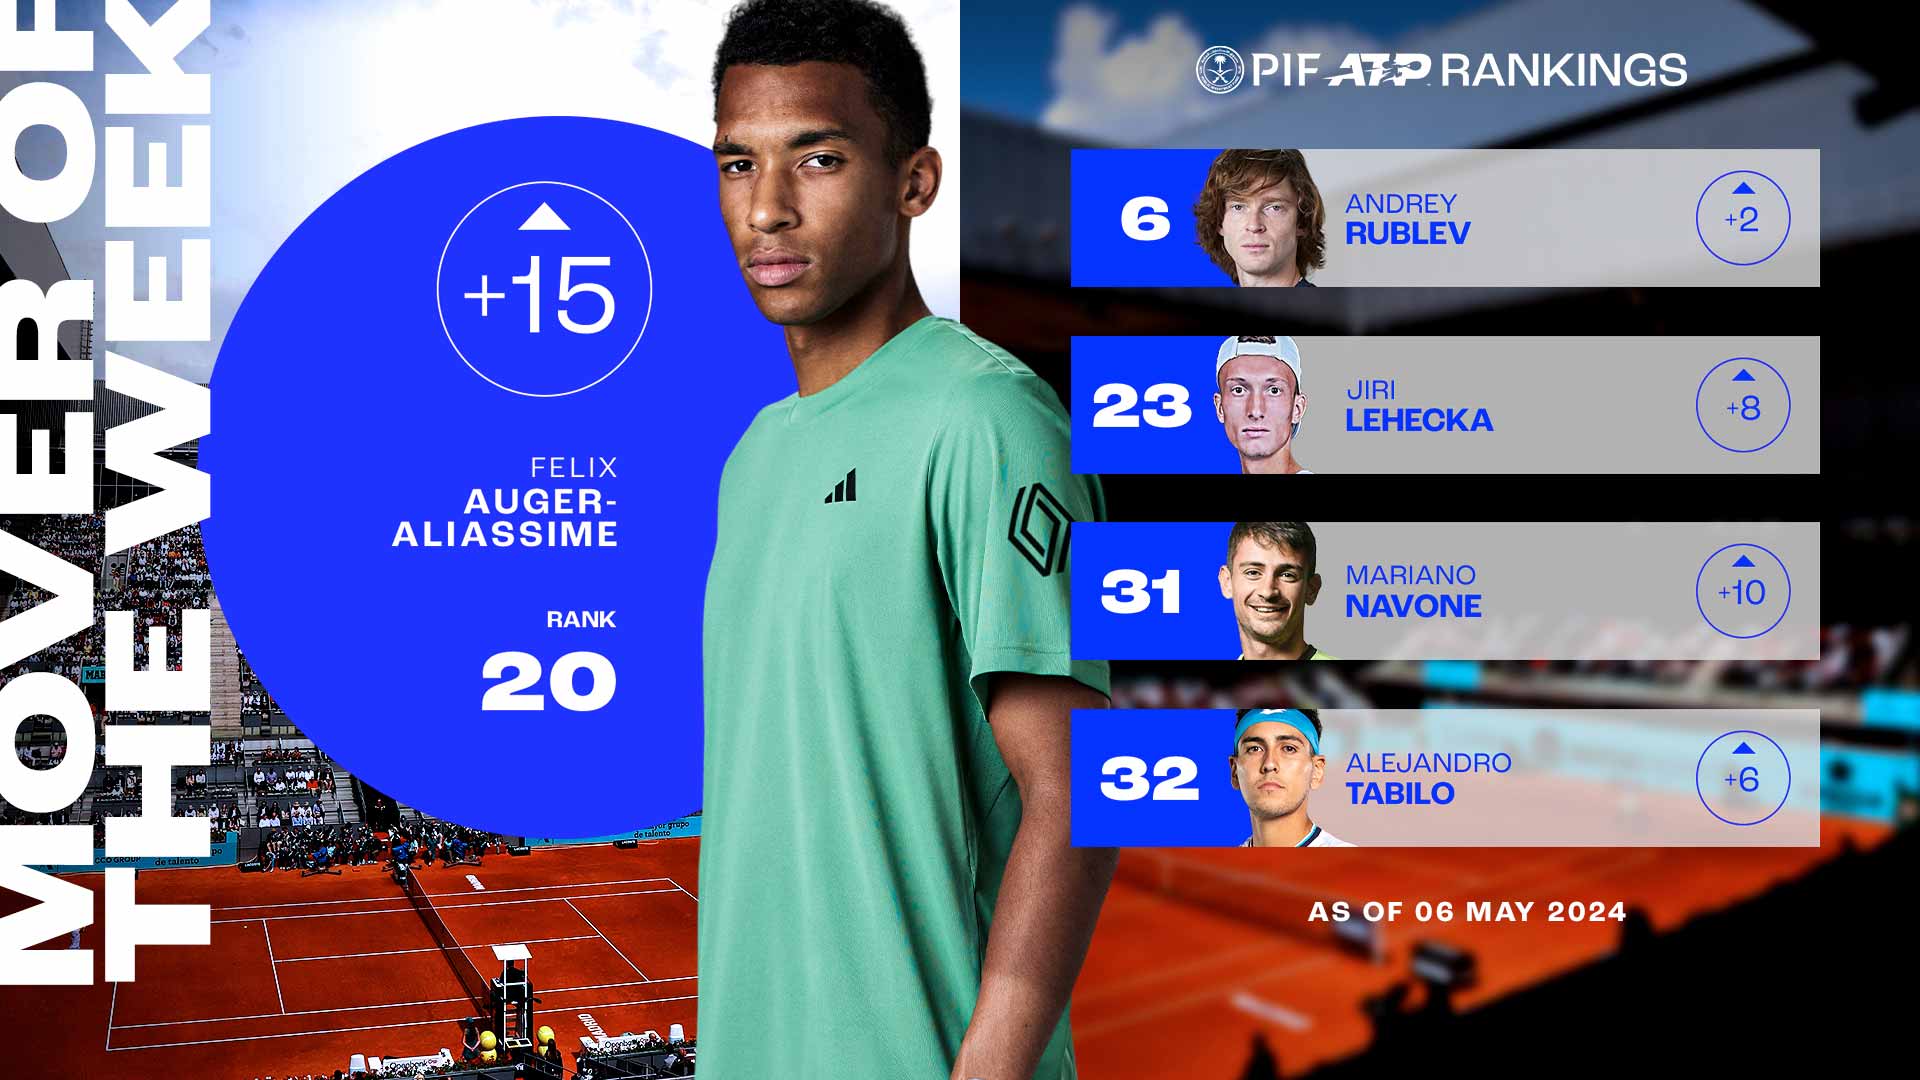 Felix Auger-Aliassime has returned to the Top 20 of the PIF ATP Rankings after reaching the final at the Mutua Madrid Open.